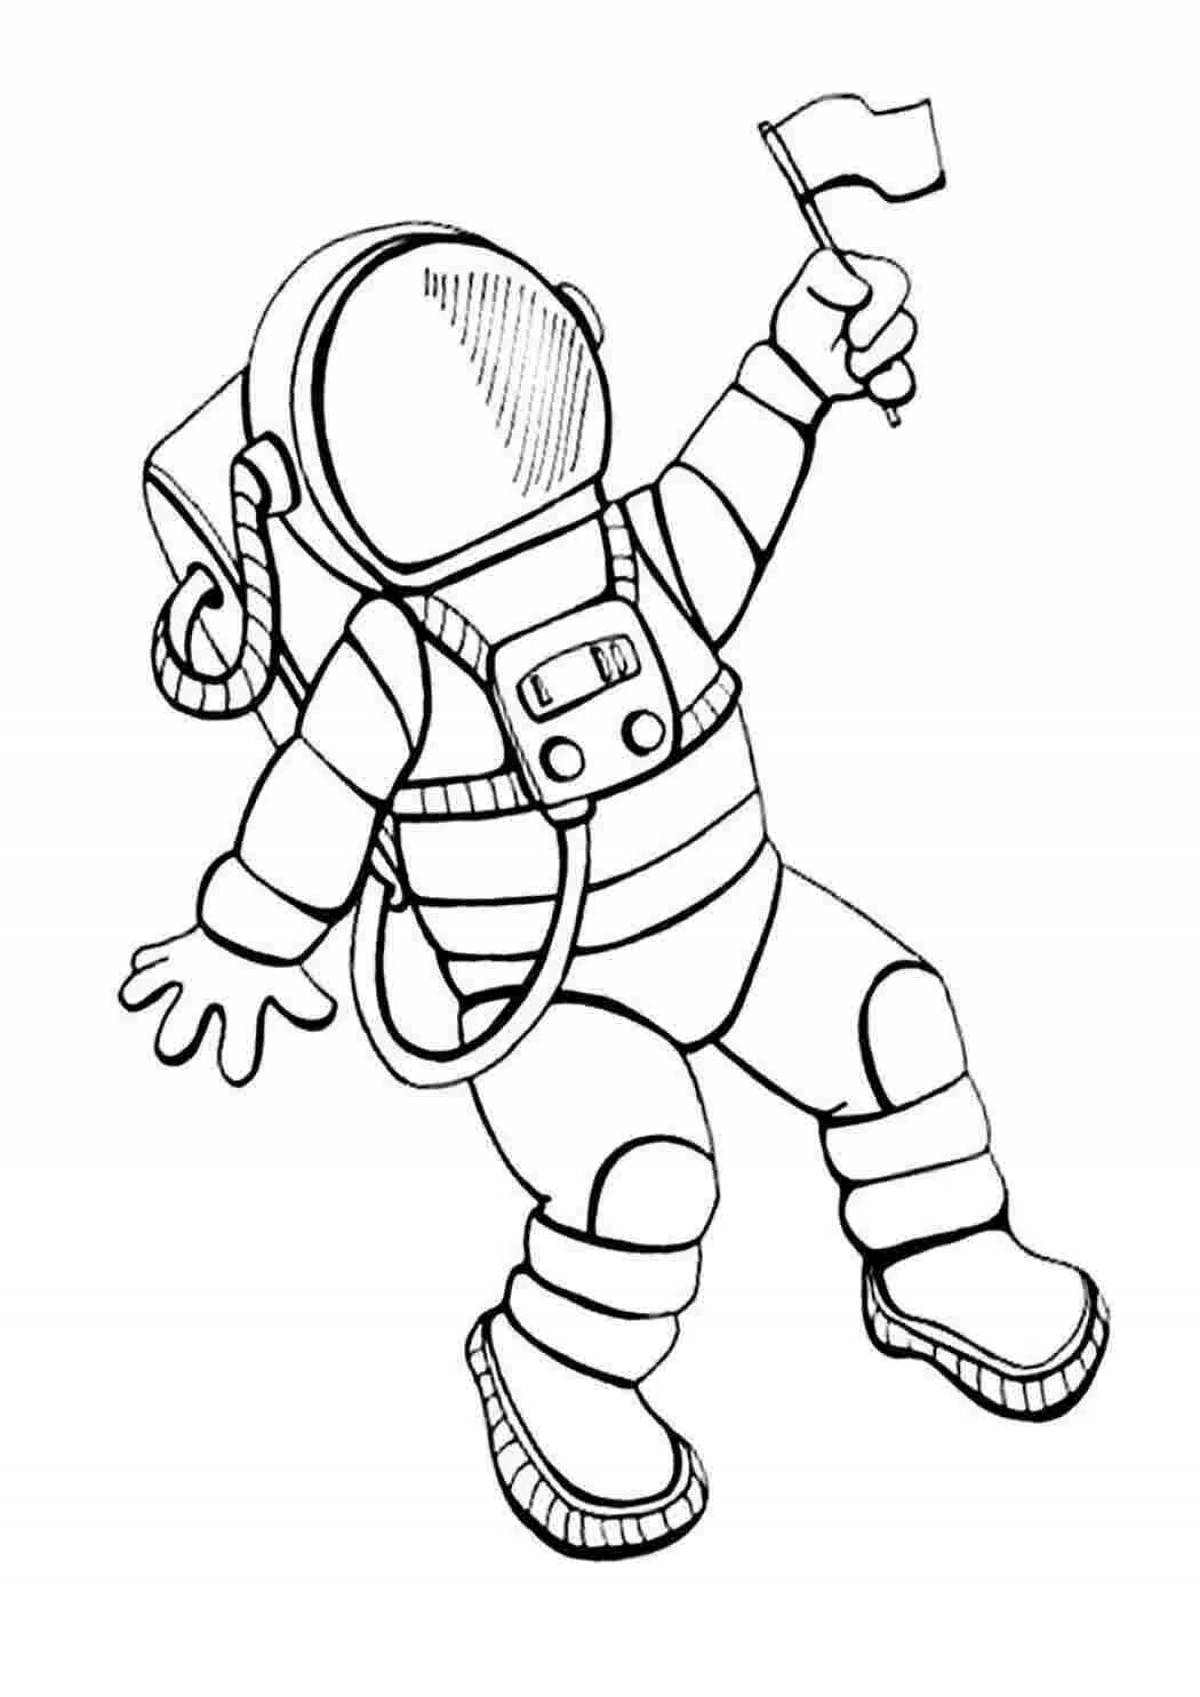 Spaceman in space suit #4